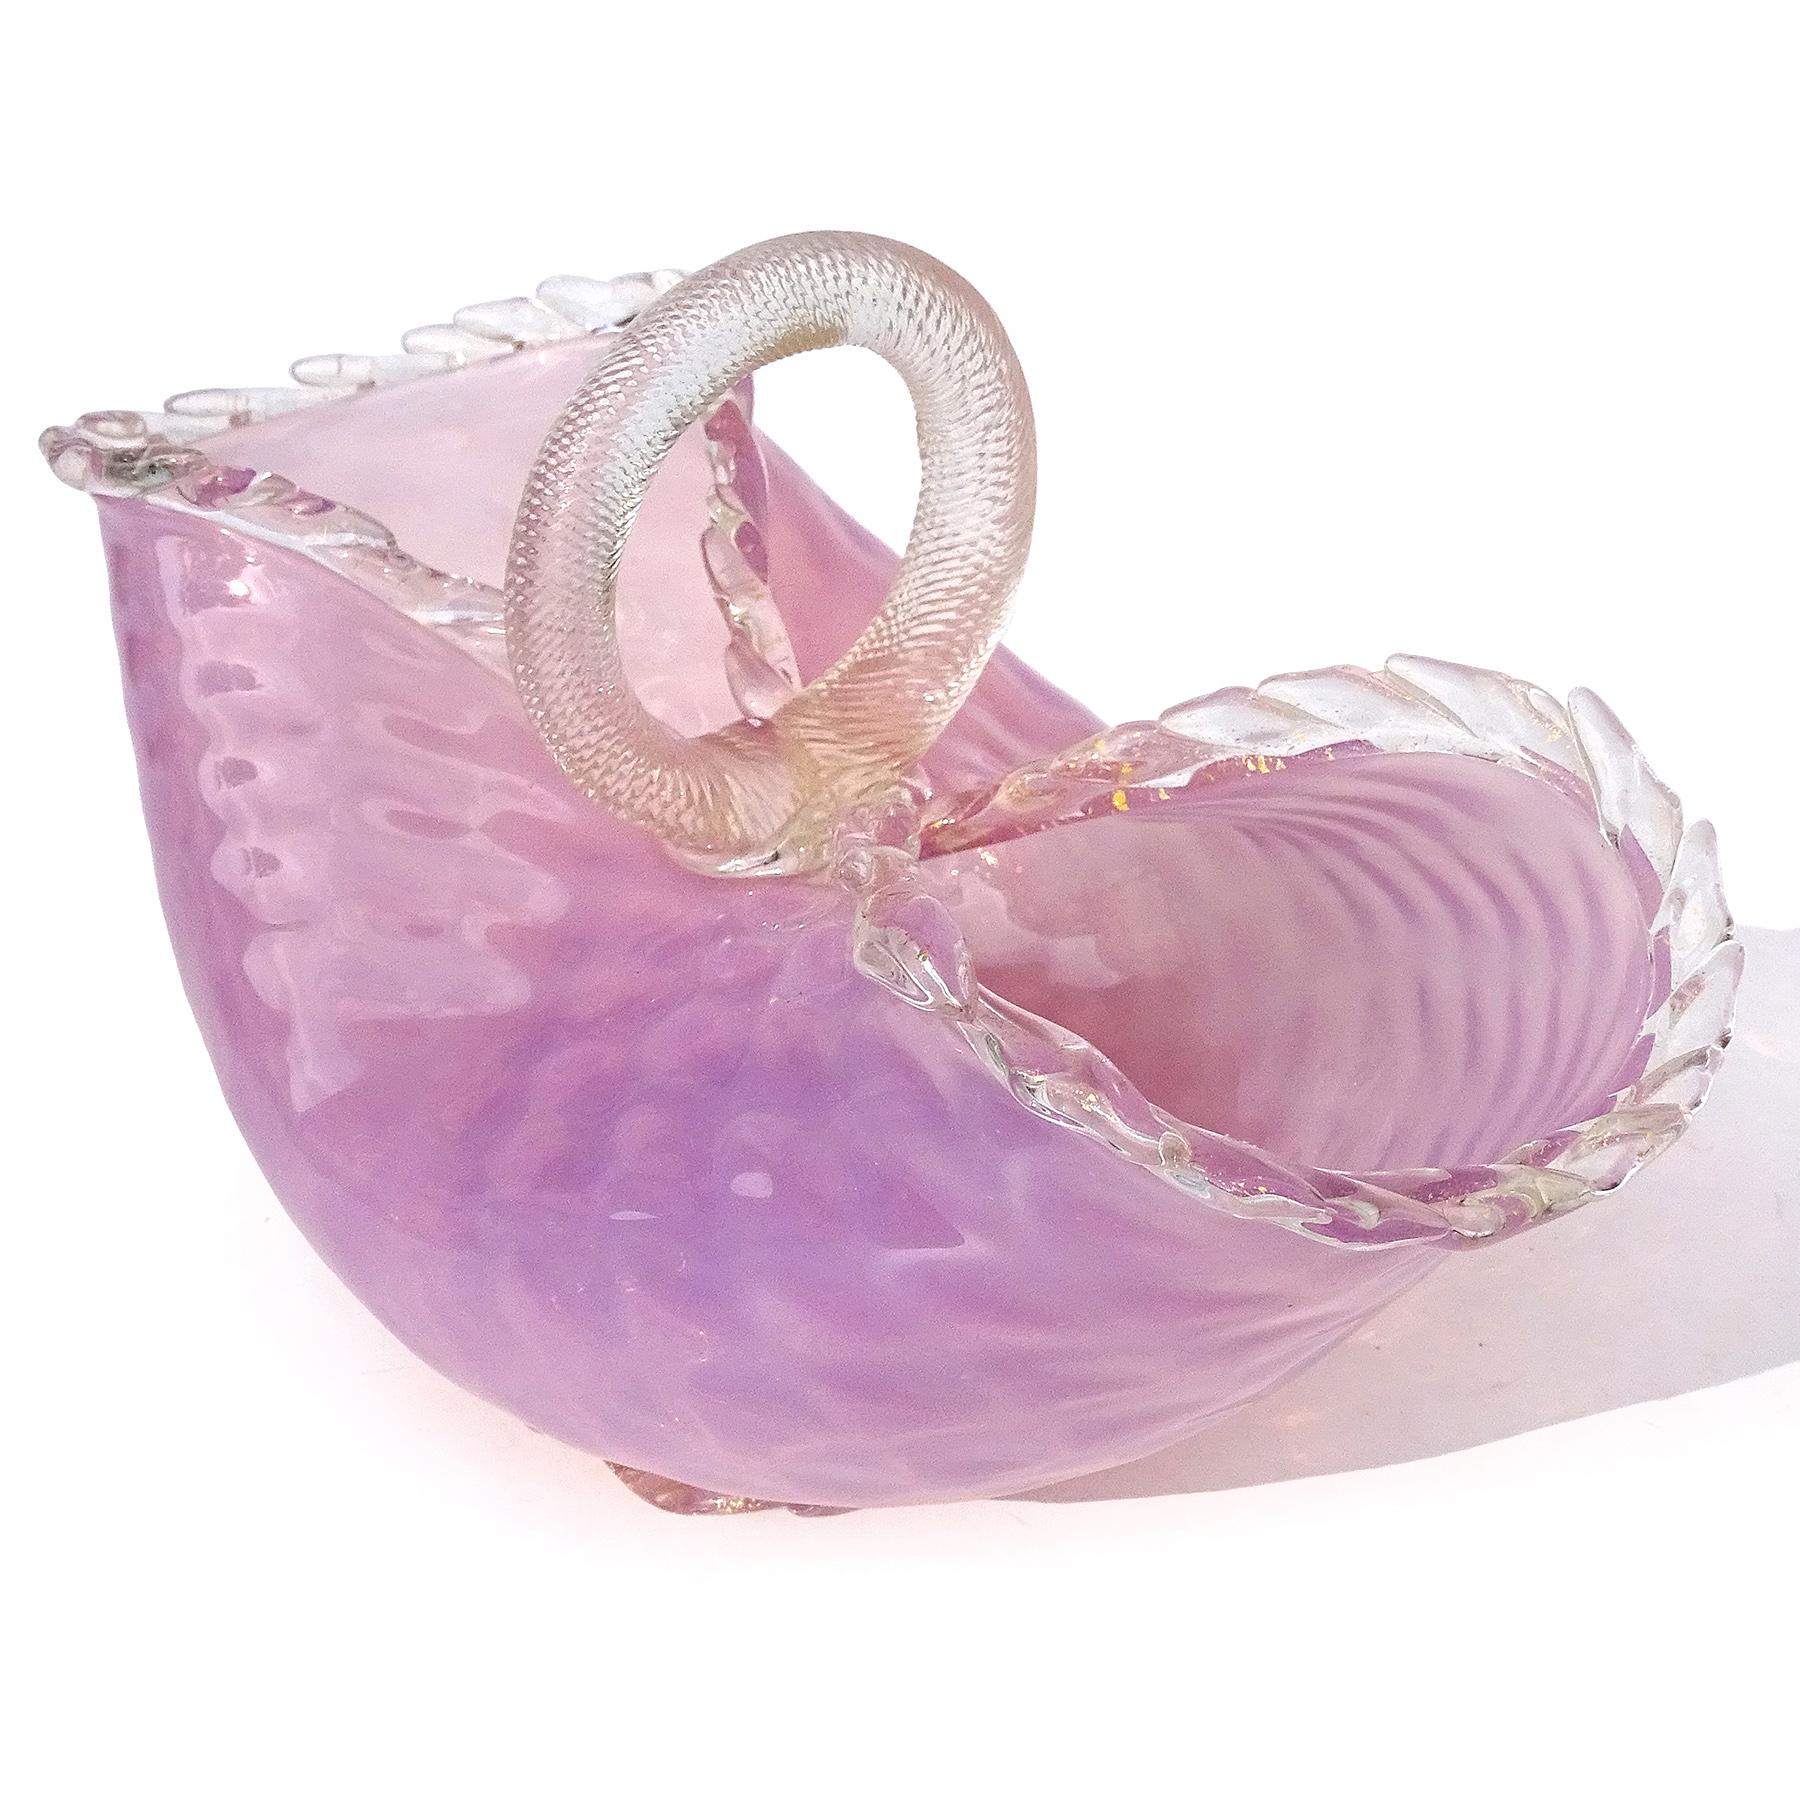 20th Century Murano Pink Opalescent Gold Flecks Diamond Quilted Italian Art Glass Basket Vase For Sale